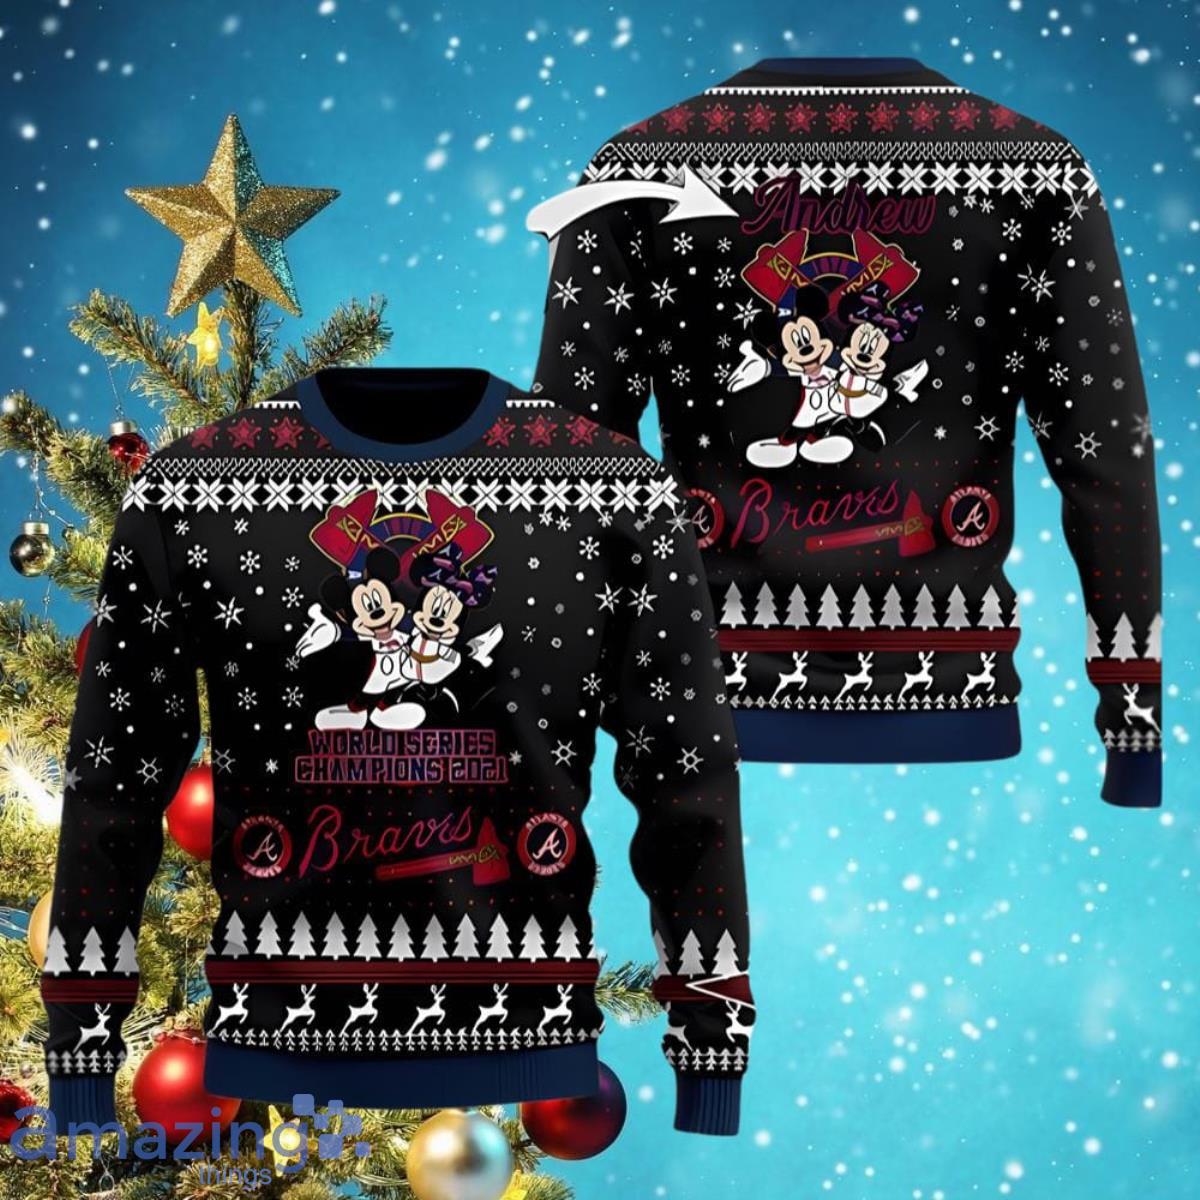 Atlanta Braves Mickey Mouse sweater - LIMITED EDITION